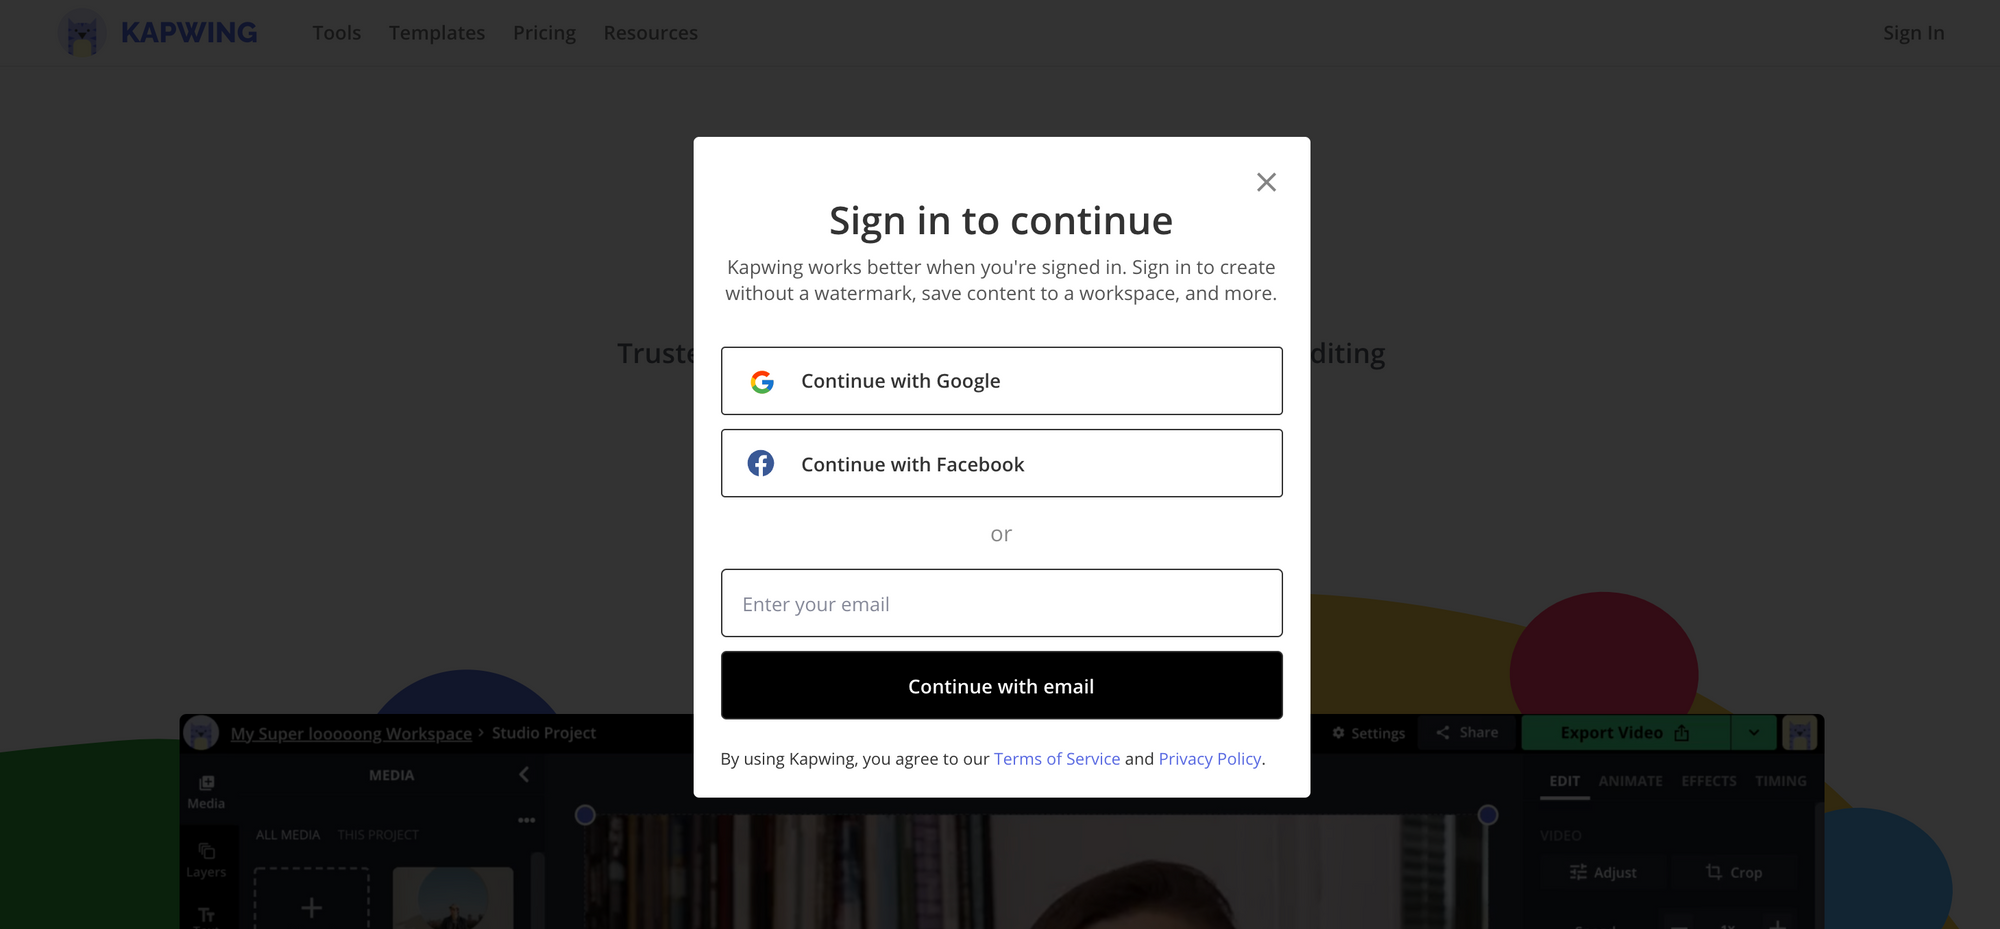 A sign in modal on the Kapwing landing page that offers users three ways to sign in, using Google, Facebook or their email address.